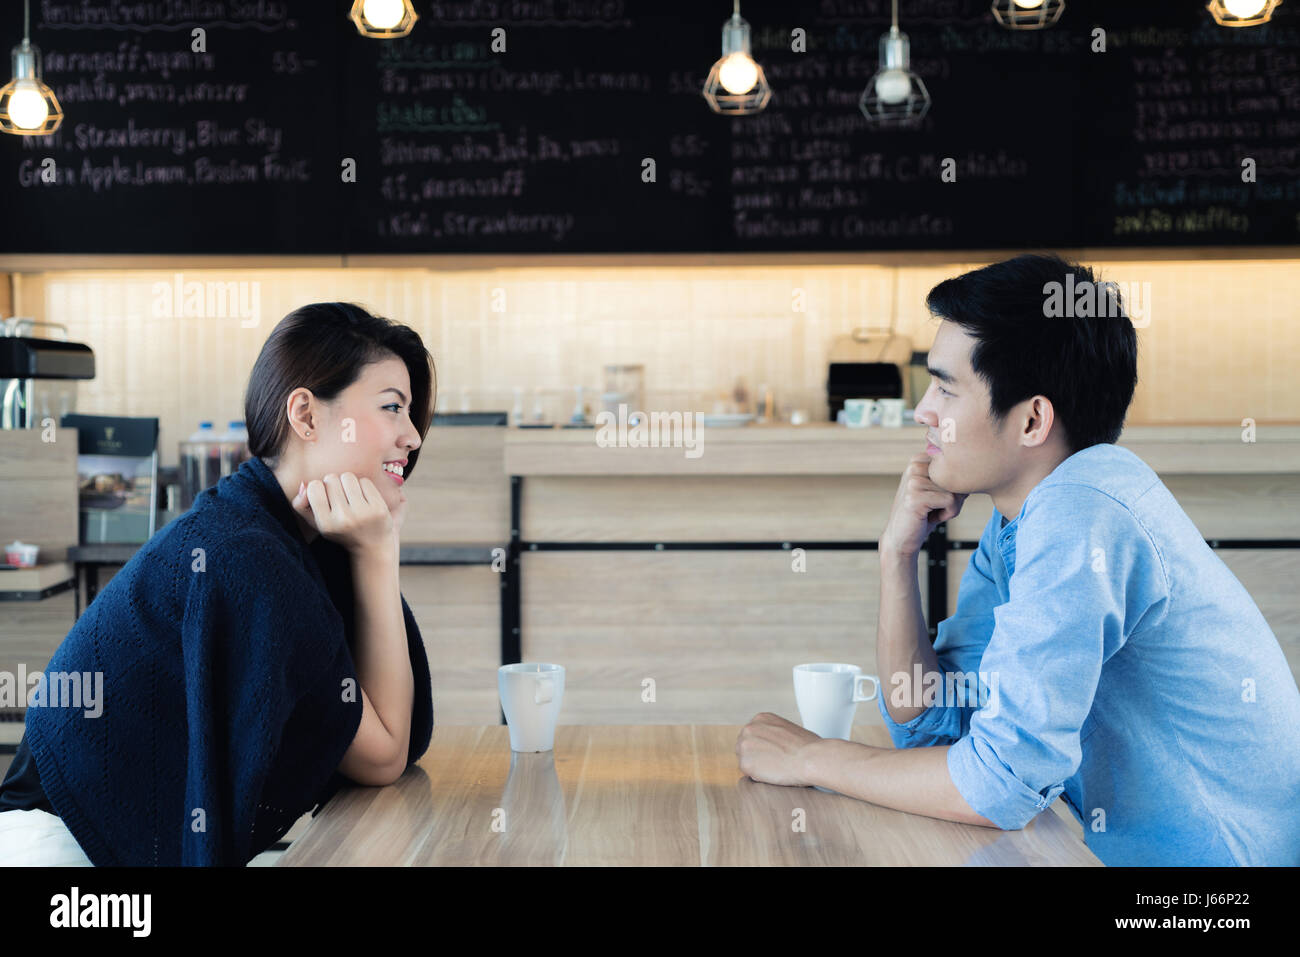 Dating in a cafe. Beautiful Asian lover couple sitting in a cafe enjoying in coffee and conversation. Love and romance. Stock Photo